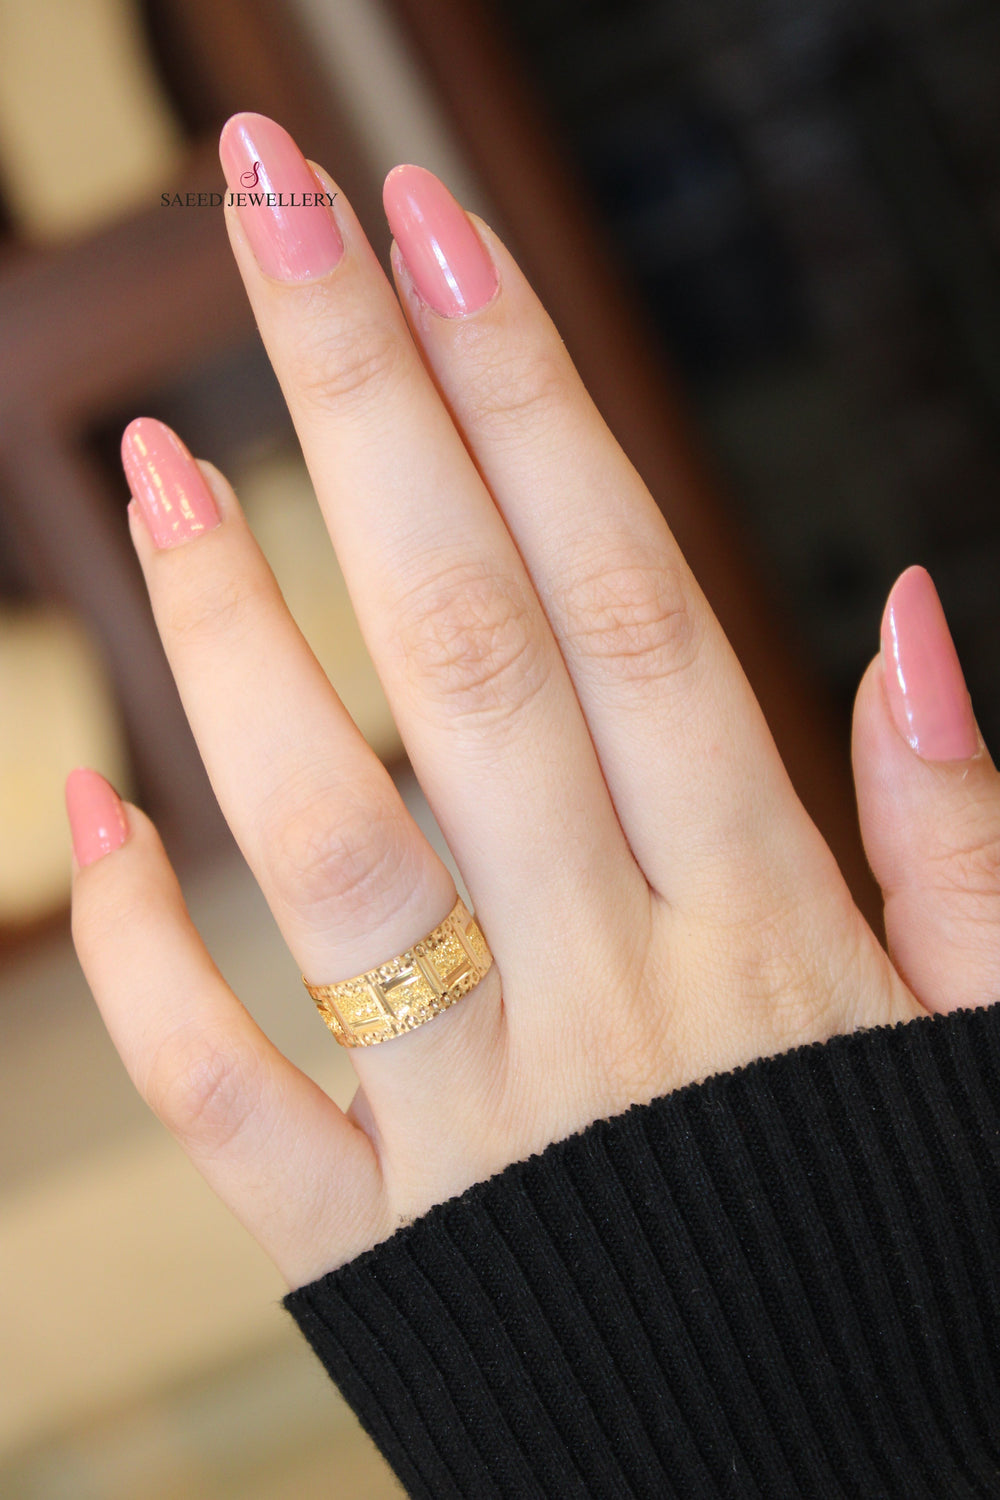 21K Gold Laser Wedding Ring by Saeed Jewelry - Image 2